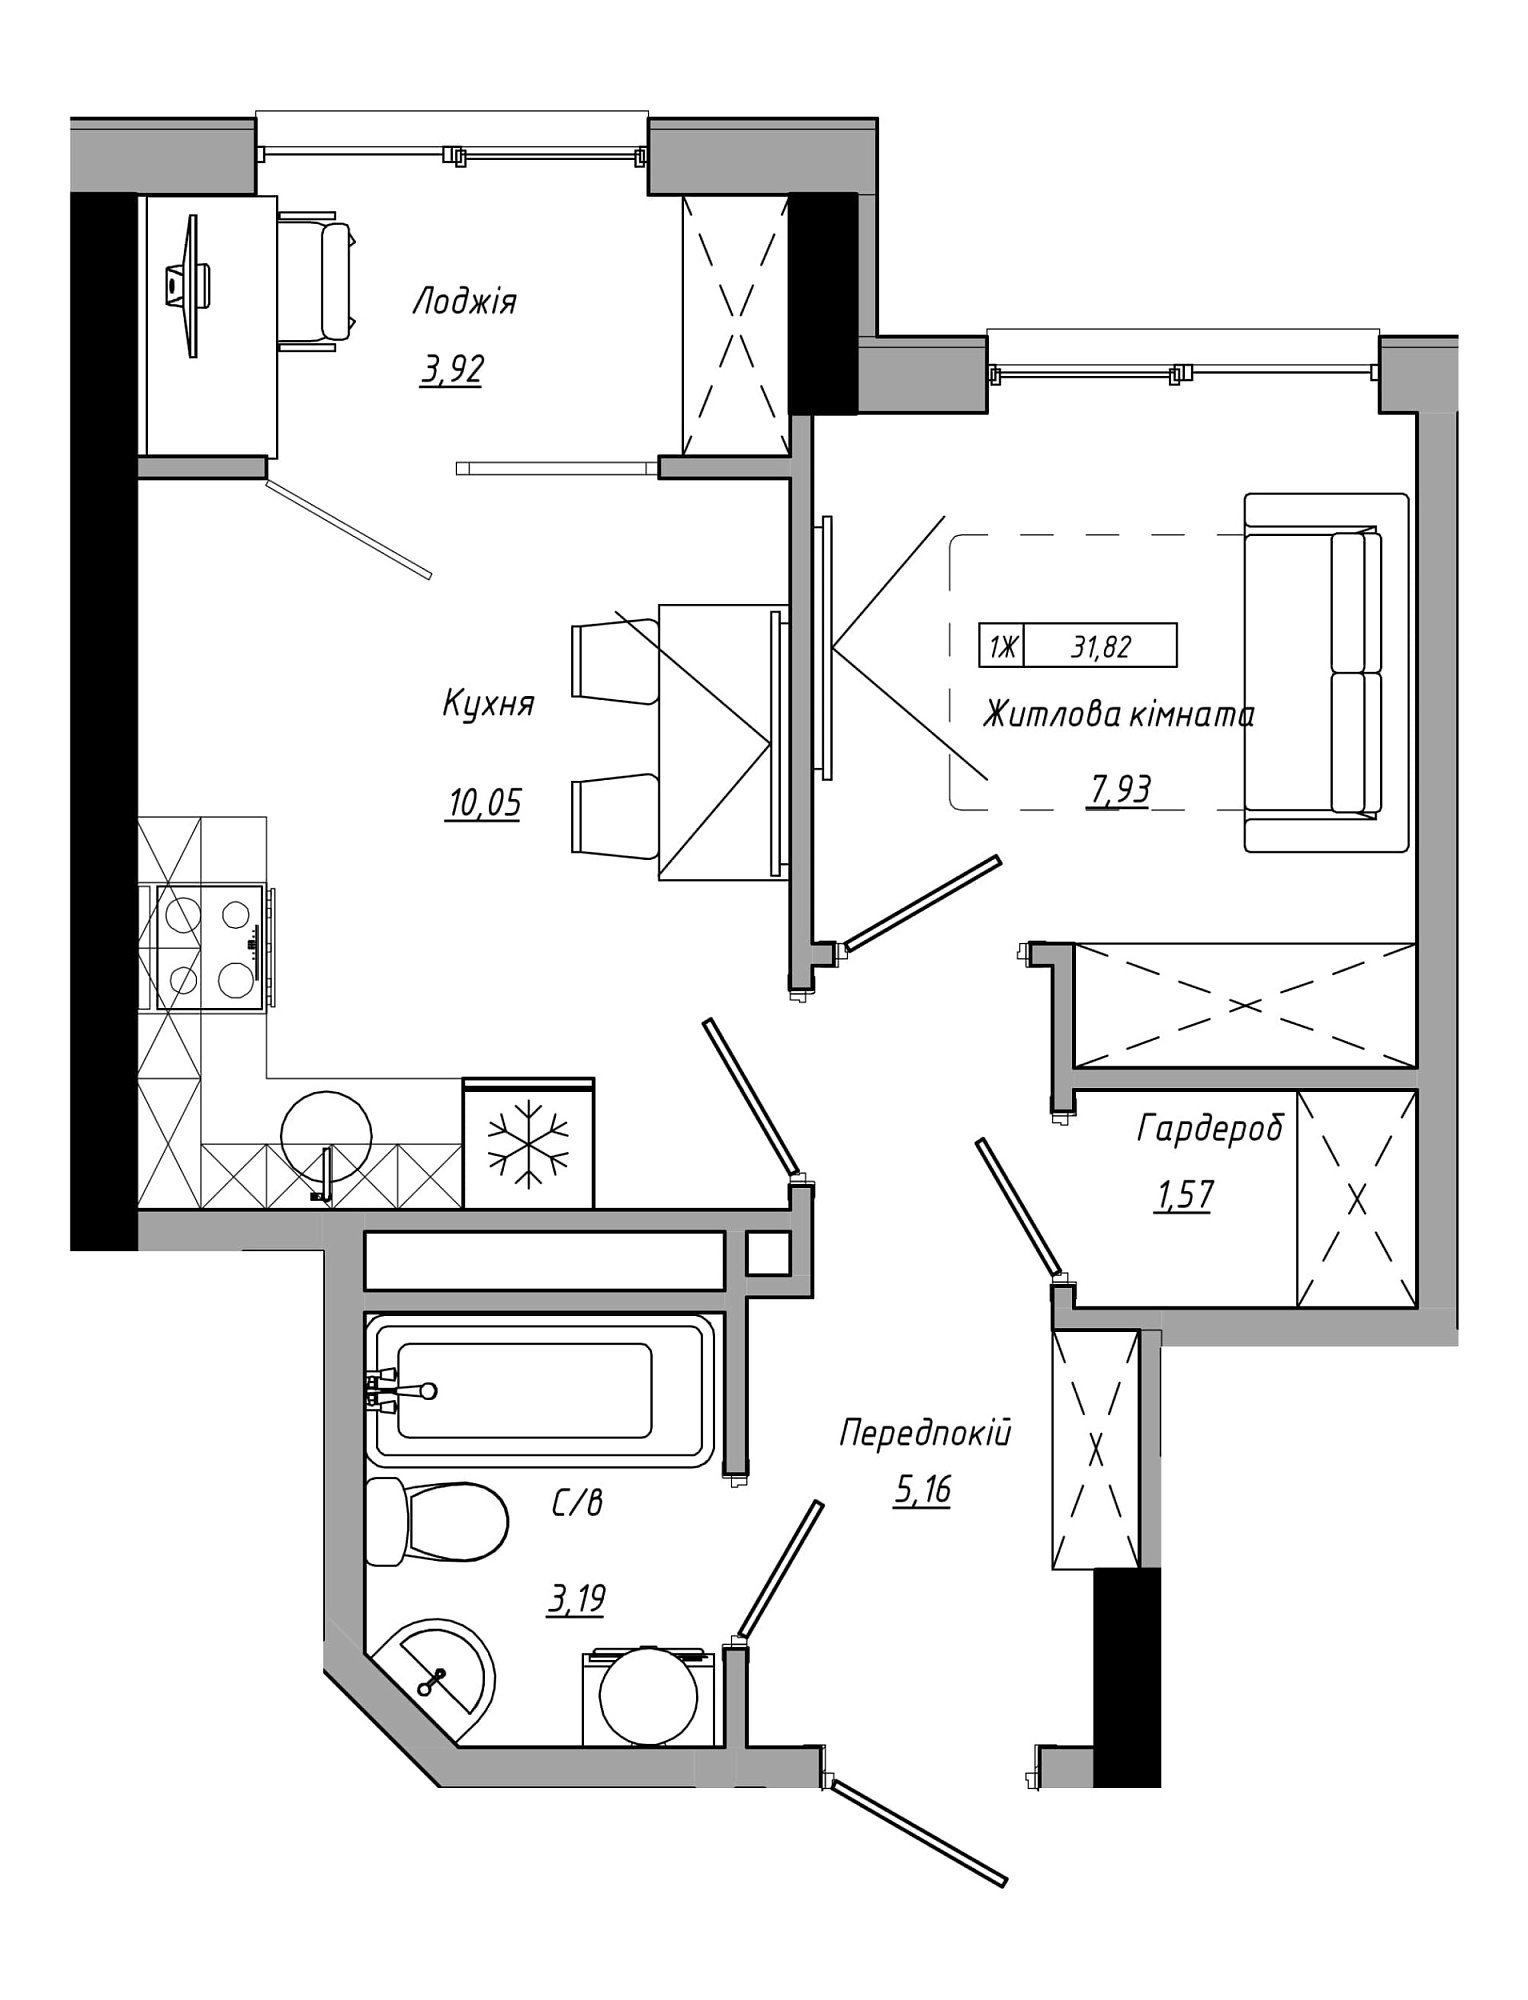 Planning 1-rm flats area 31.82m2, AB-21-14/00110.